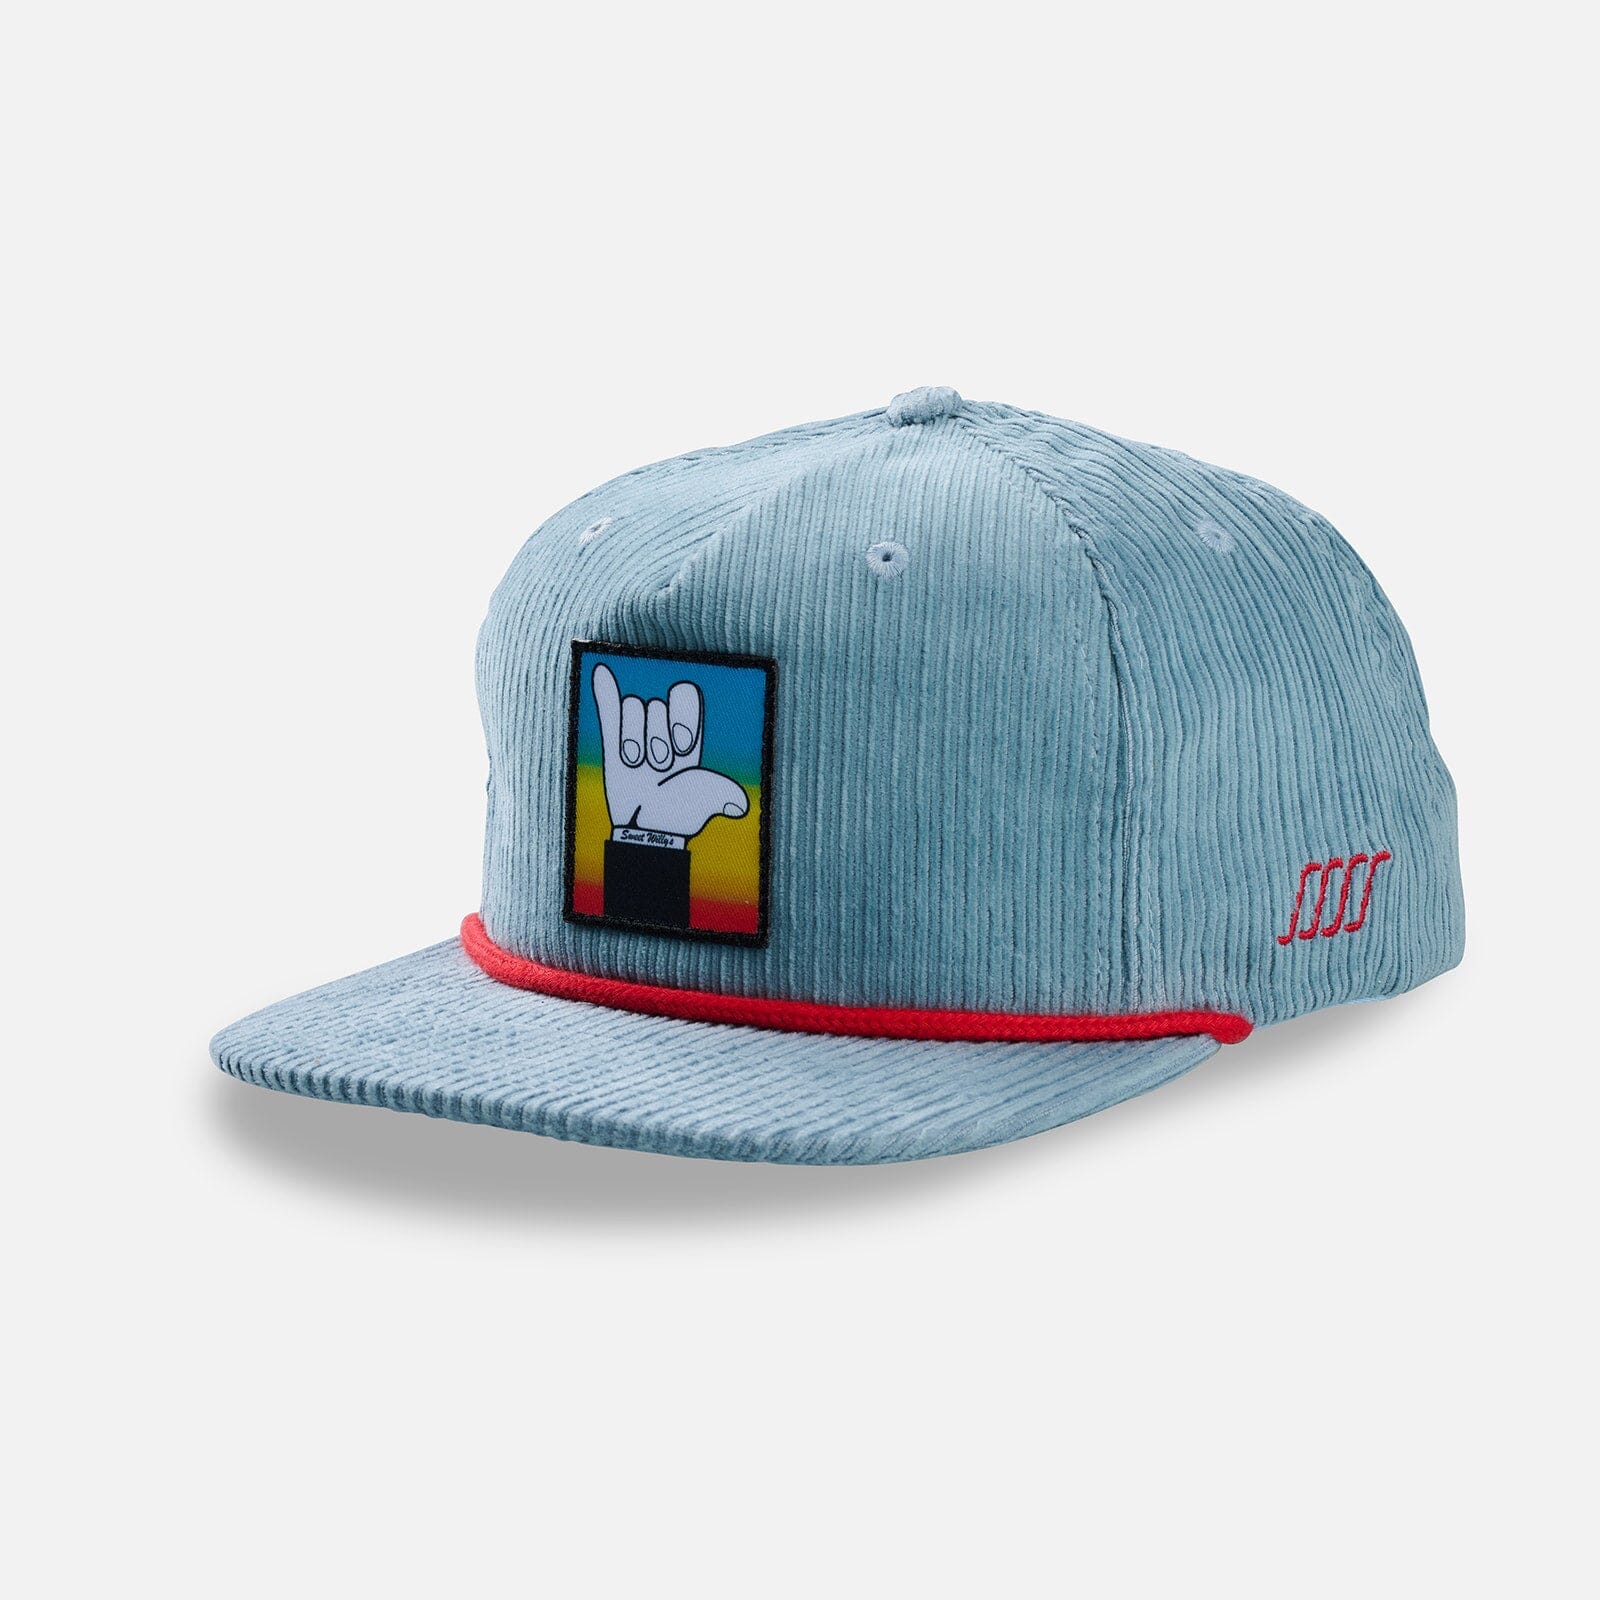 South Swell X Sweet Willy's Corduroy Rope Hat Hats SOUTH SWELL Blue Grey/ Red Rope 